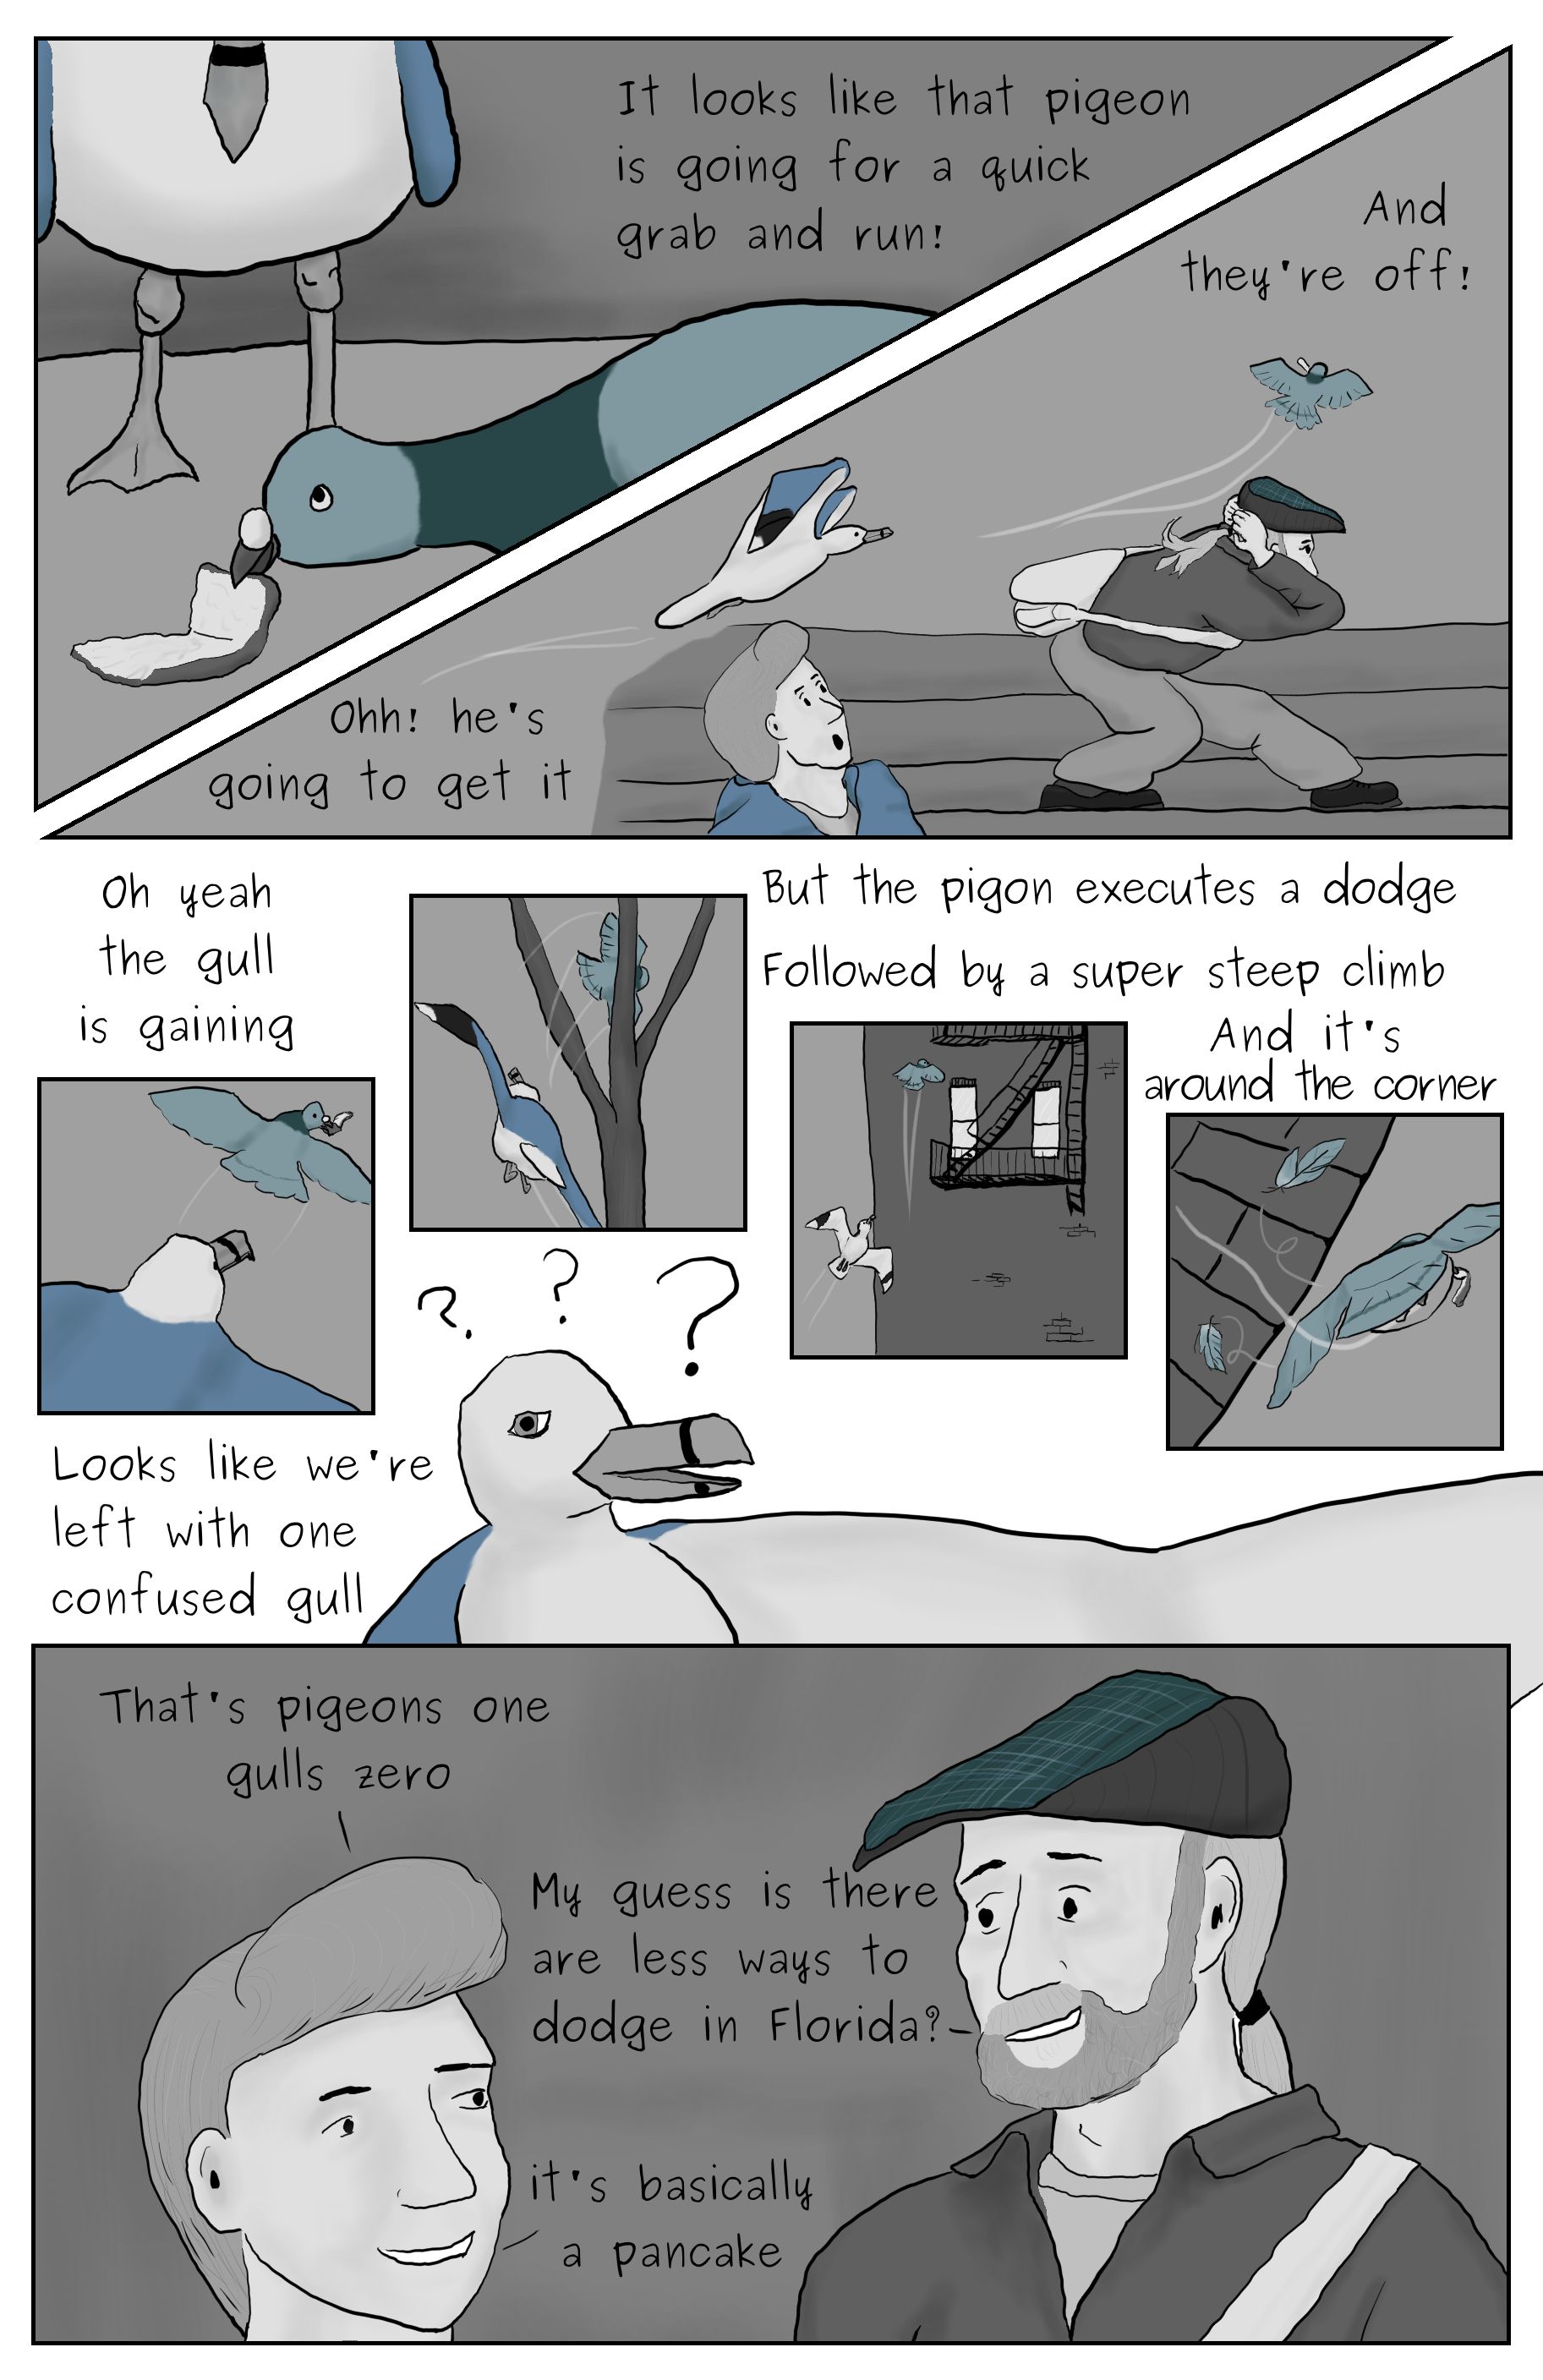 A comic featuring Phillip Gerba and Shannon Haddock observing a pigeon snatching away a crust of bread from a seagull. The seagull chaces the pigeon, but the pigeon evades the gull with it's supirior agility. Shannon and Phillip take this as evedance of the reletive success of pigeons over seagulls in New York City.